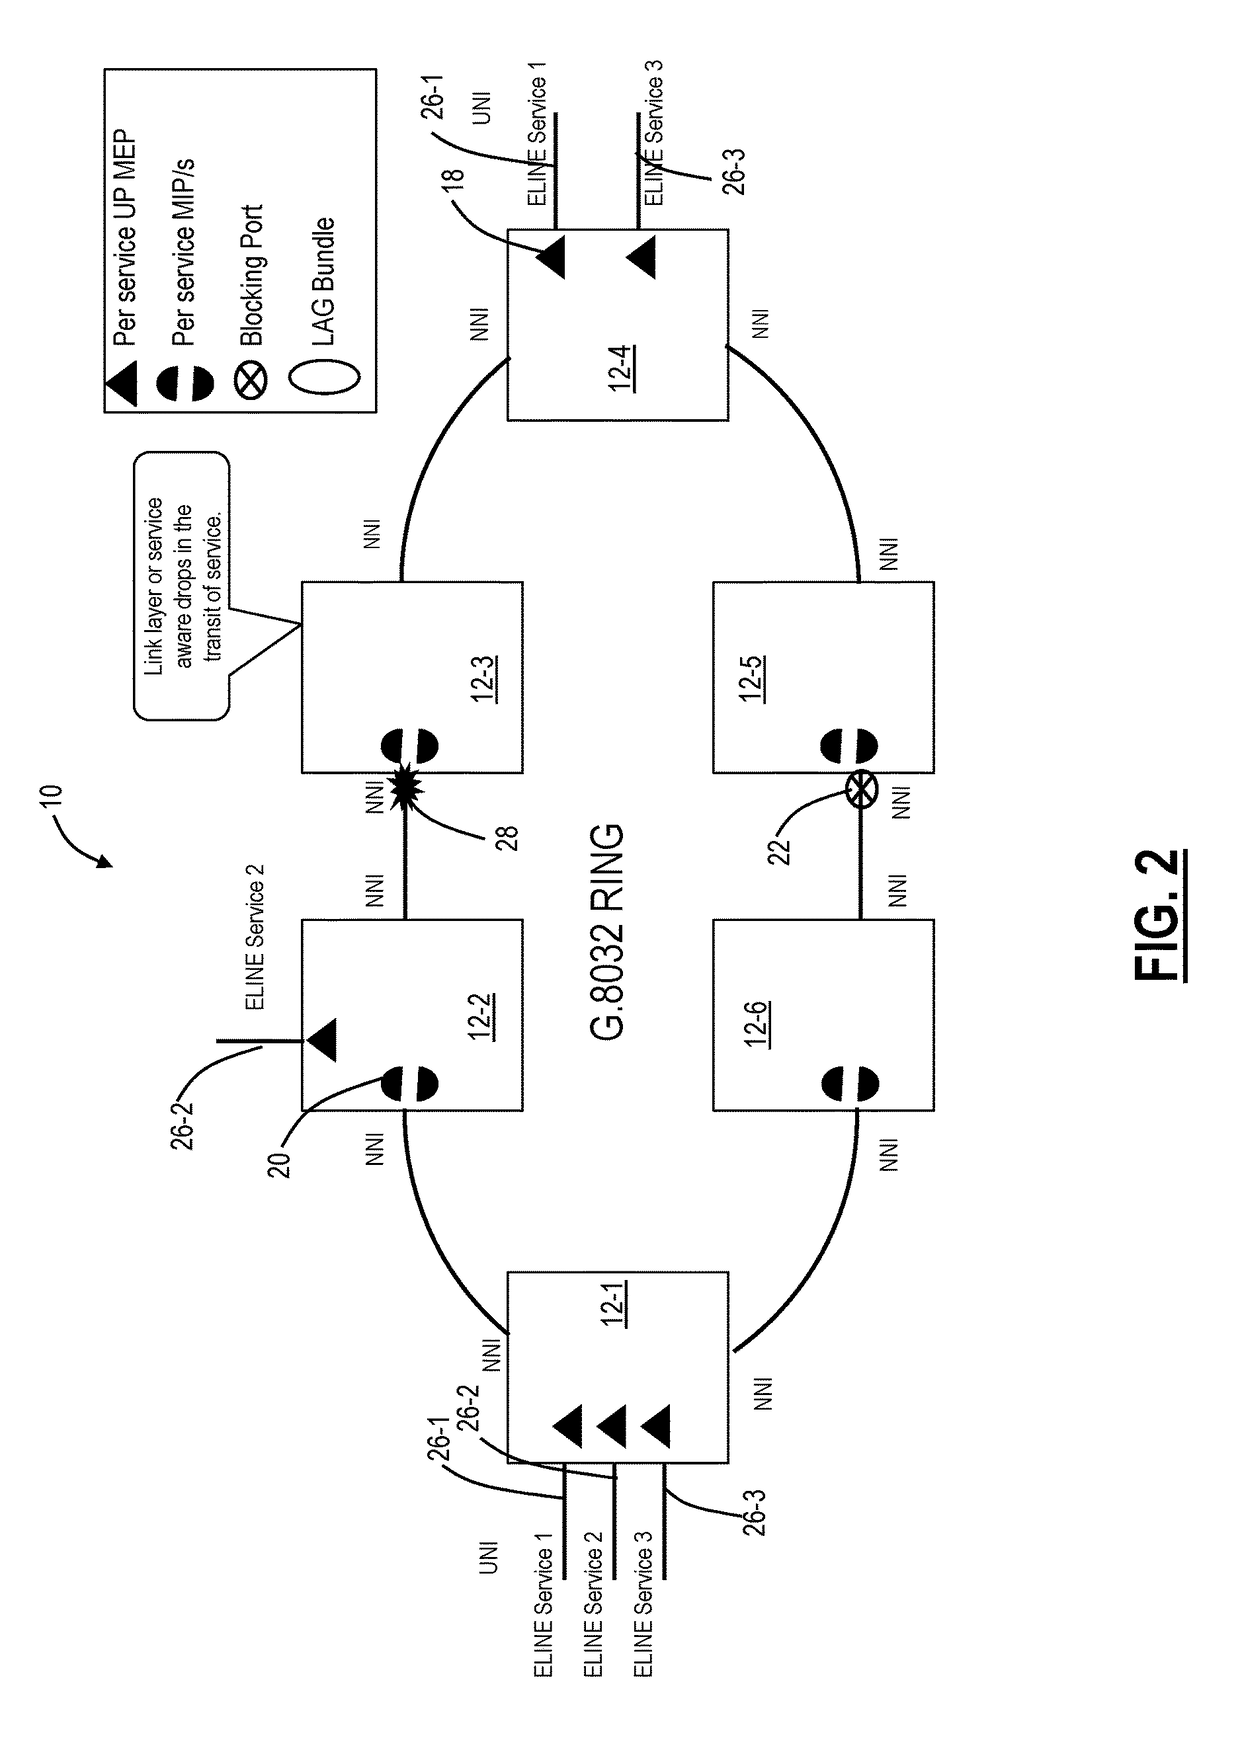 Propagation of frame loss information by receiver to sender in an ethernet network